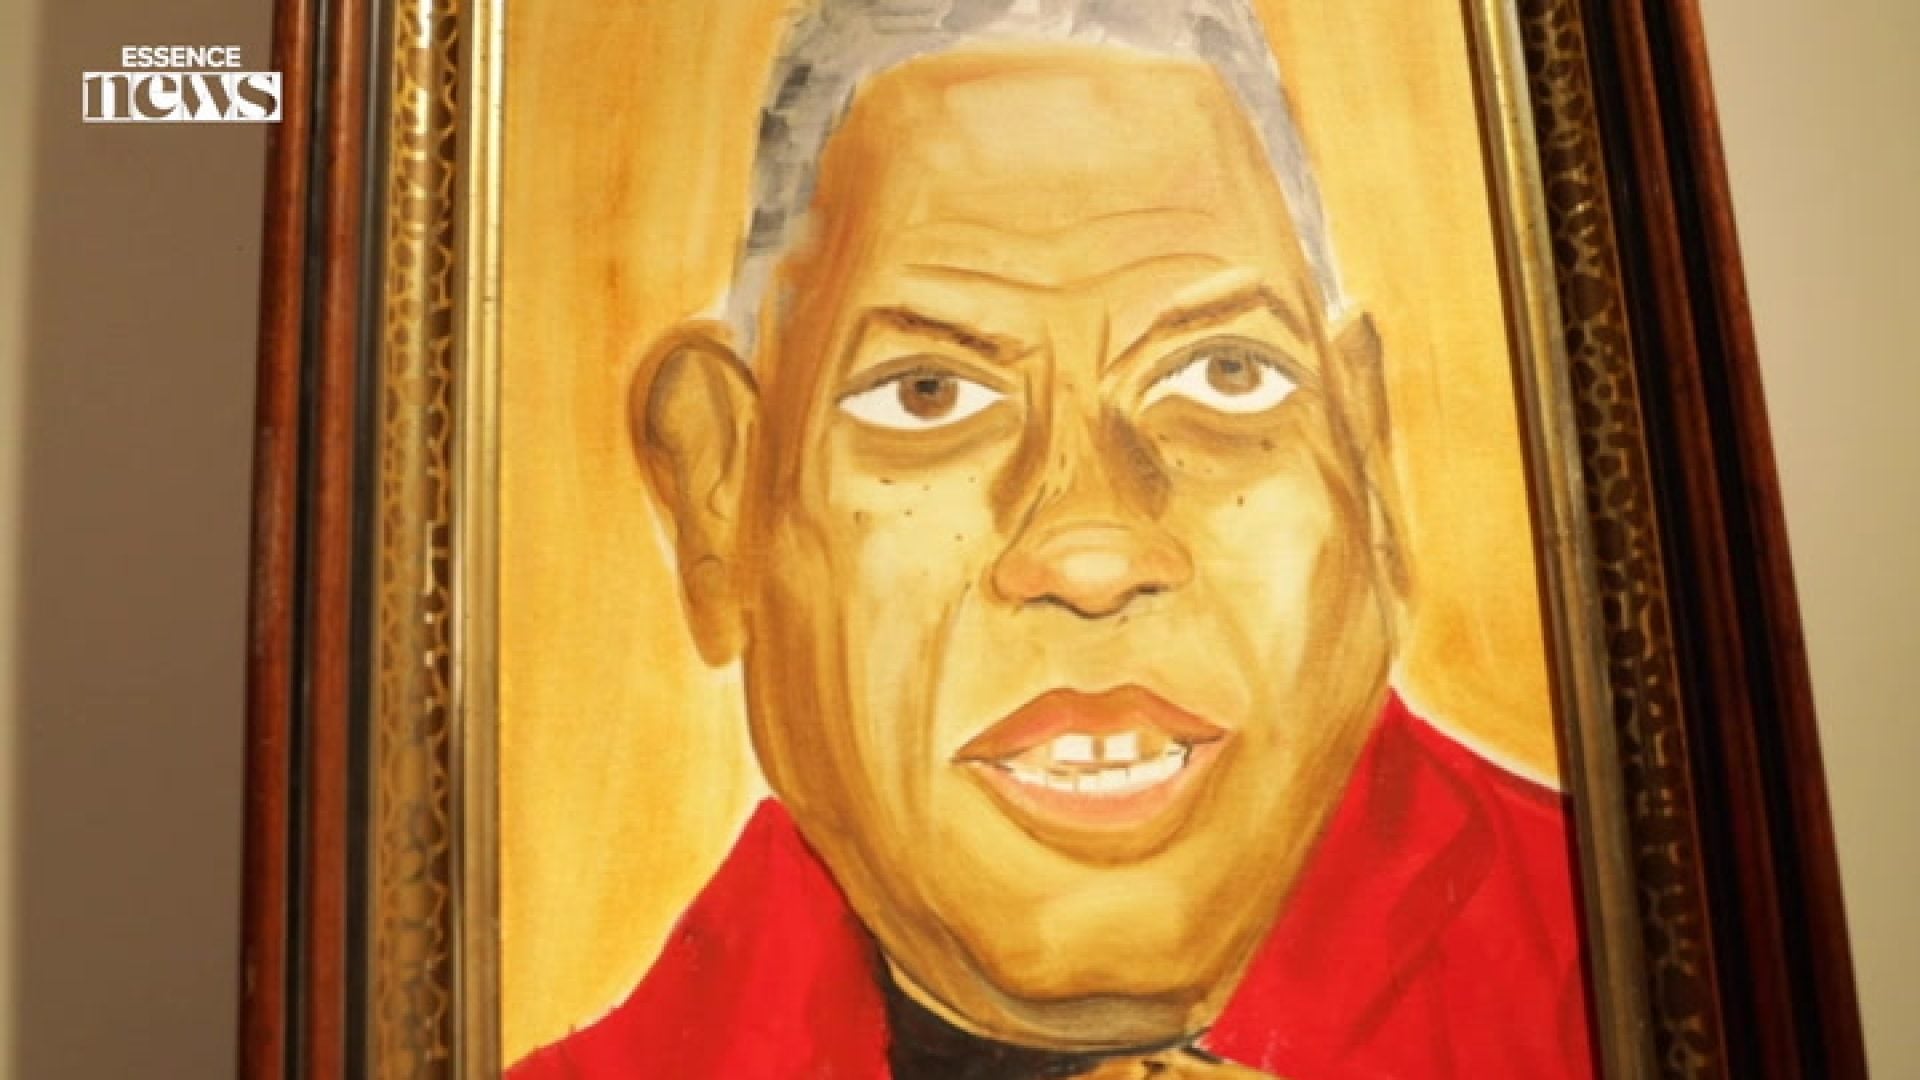 WATCH: Inside The Fabulous Emporium Of André Leon Talley With Christie’s